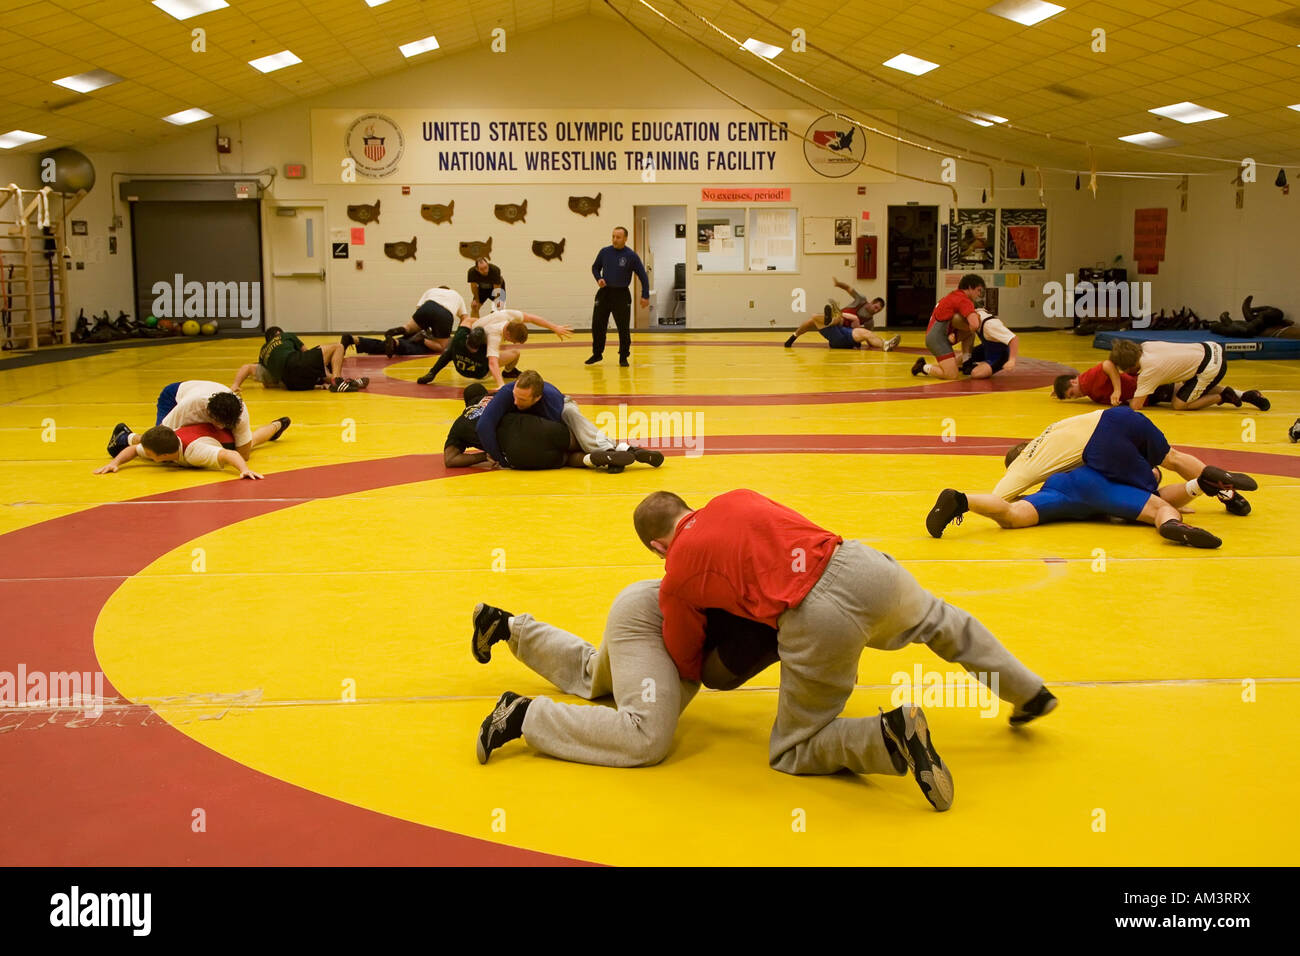 Greco-Roman wrestlers train for the Olympics at the US Olympic Education Center Stock Photo